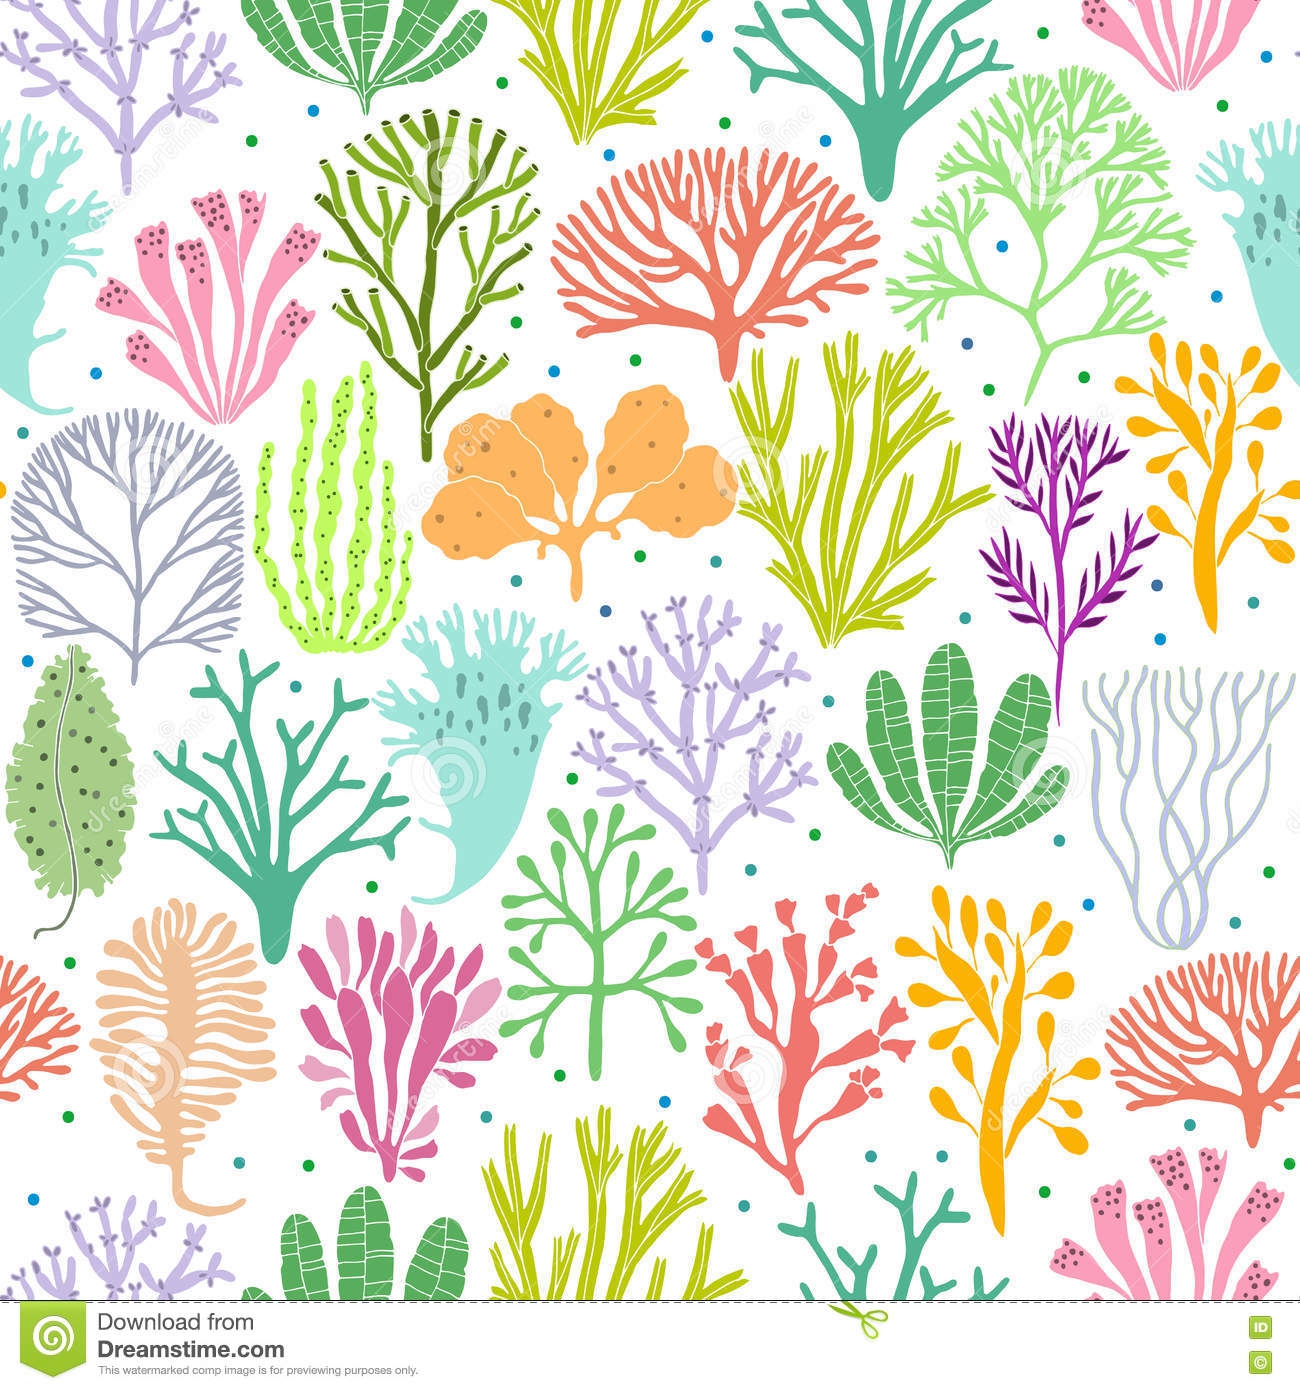 Embed codes for your. Algae clipart sea plant